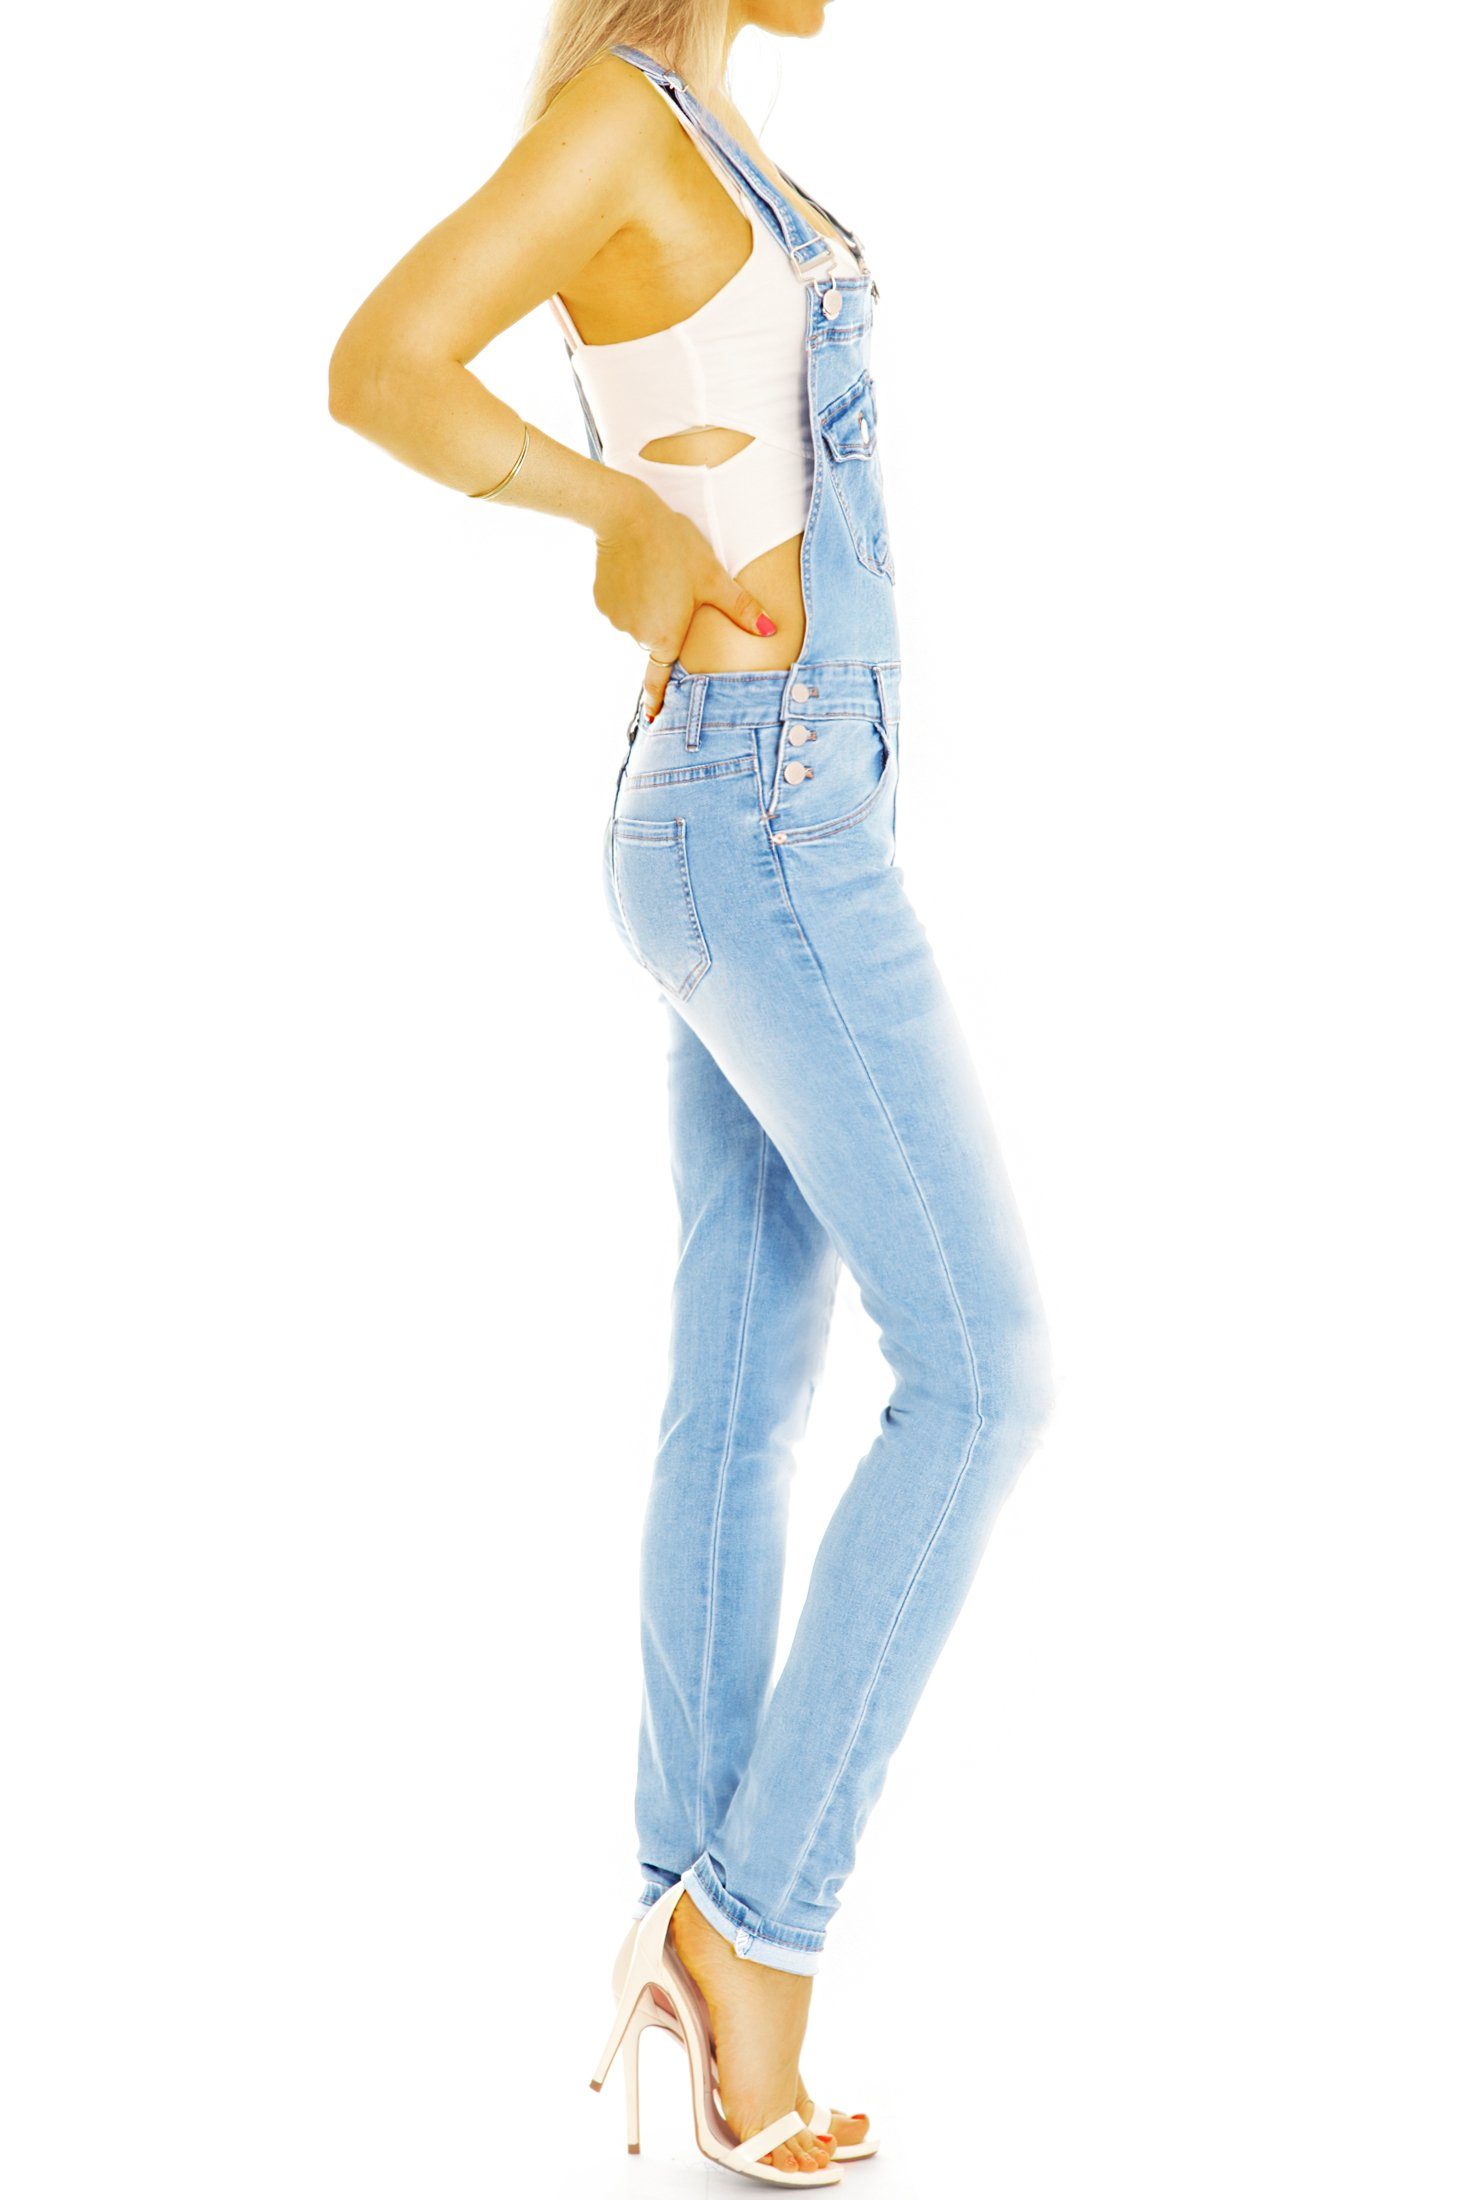 be mit styled Latzhose Overall Jeanslatzhose - Stretch-Anteil, fit - Damen j20g Jeans hellblau 5-Pocket-Style skinny bequemer in